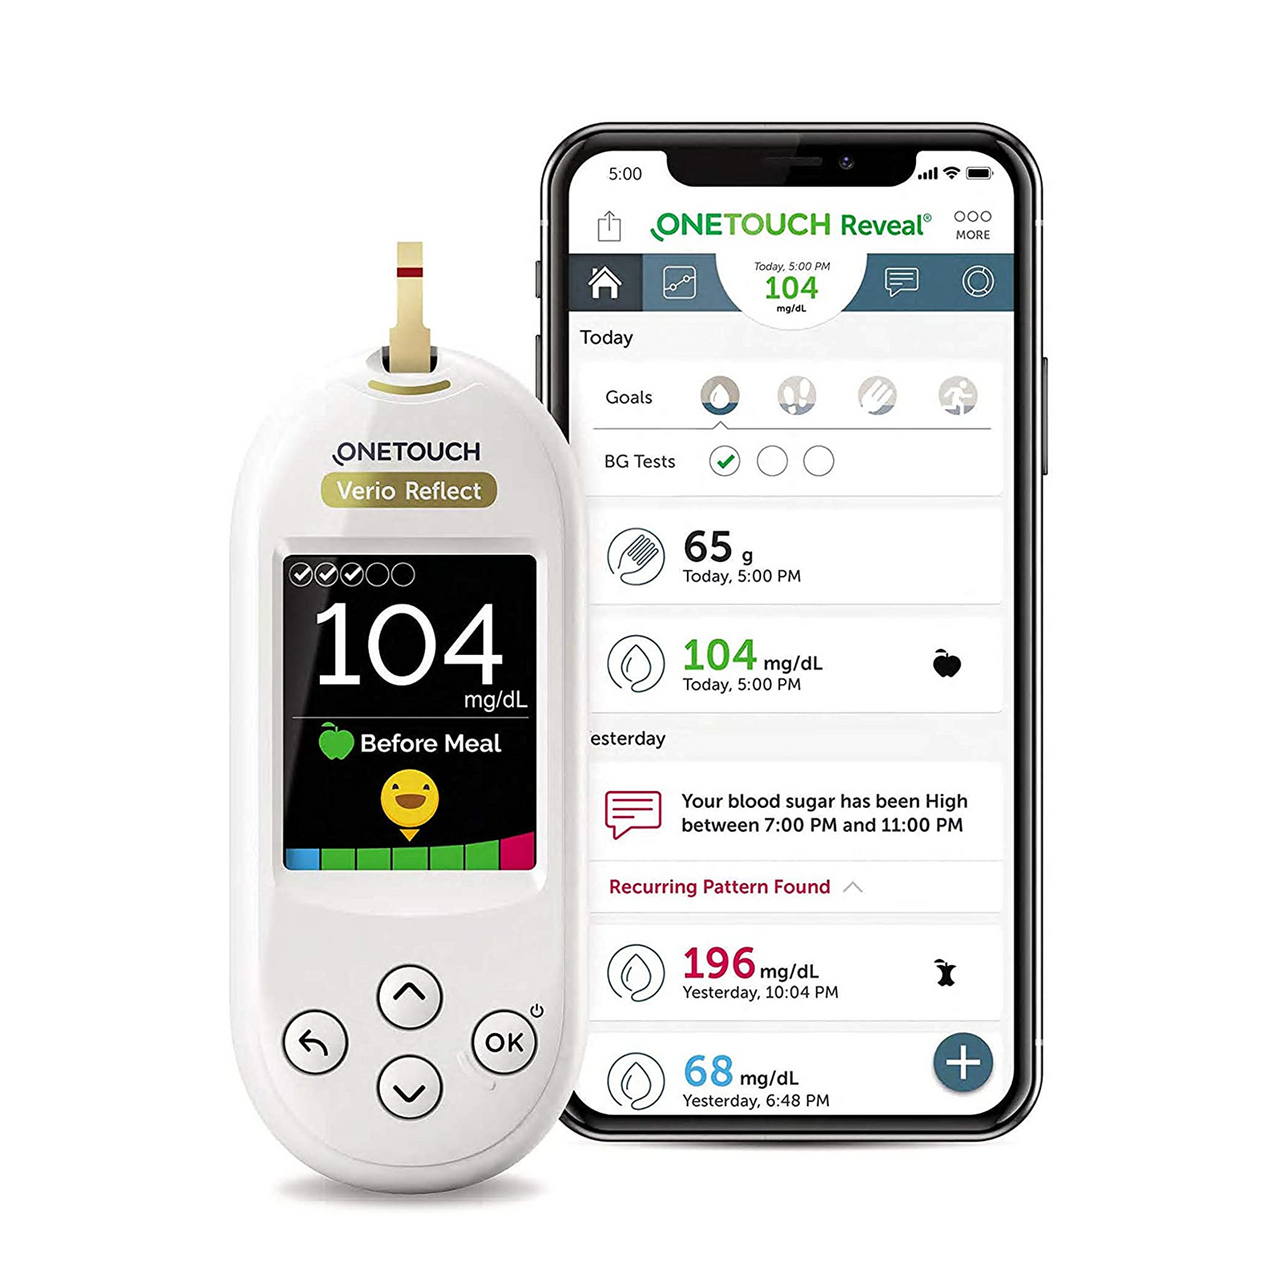  OneTouch Verio Reflect Blood Glucose Meter  Monitor For Sugar  Test Kit Includes Monitor, Lancing Device, 10 Sterile Lancets, and Carrying  Case : Health & Household